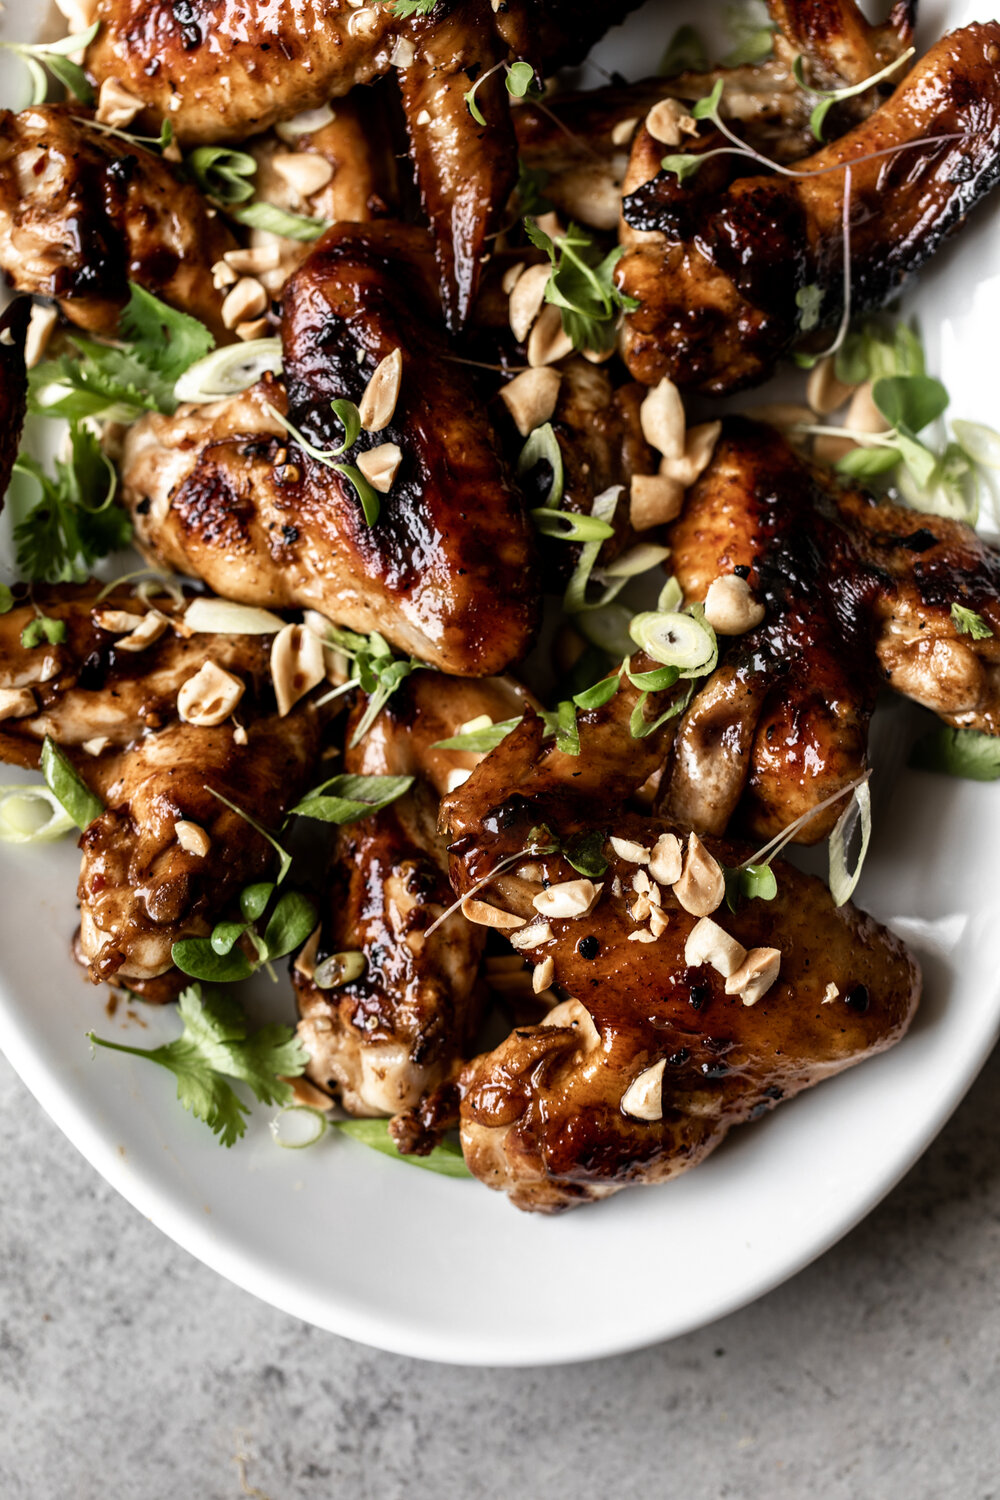 Grilled Garlic Soy Chicken Wings with Herbs & Peanuts 